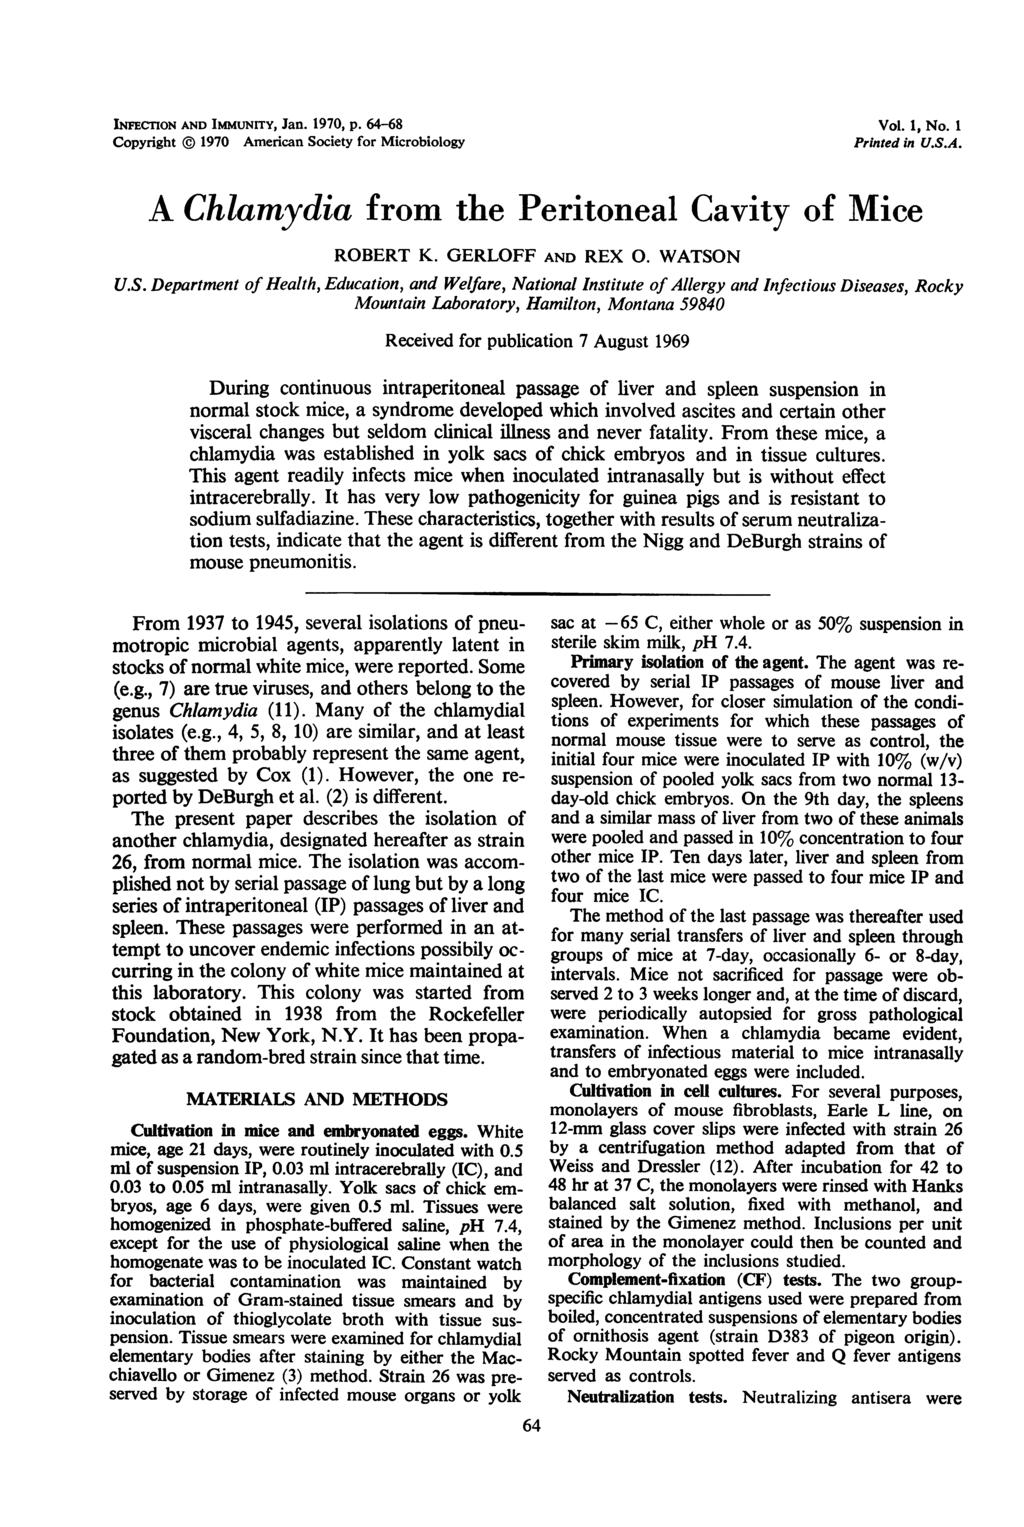 INFECTION AND IMMUNITY, Jan. 1970, p. 64-68 Copyright 1970 American Society for Microbiology Vol. 1, No. 1 Printed in U.S.A. A Chlamydia from the Peritoneal Cavity of Mice ROBERT K. GERLOFF AND REX 0.